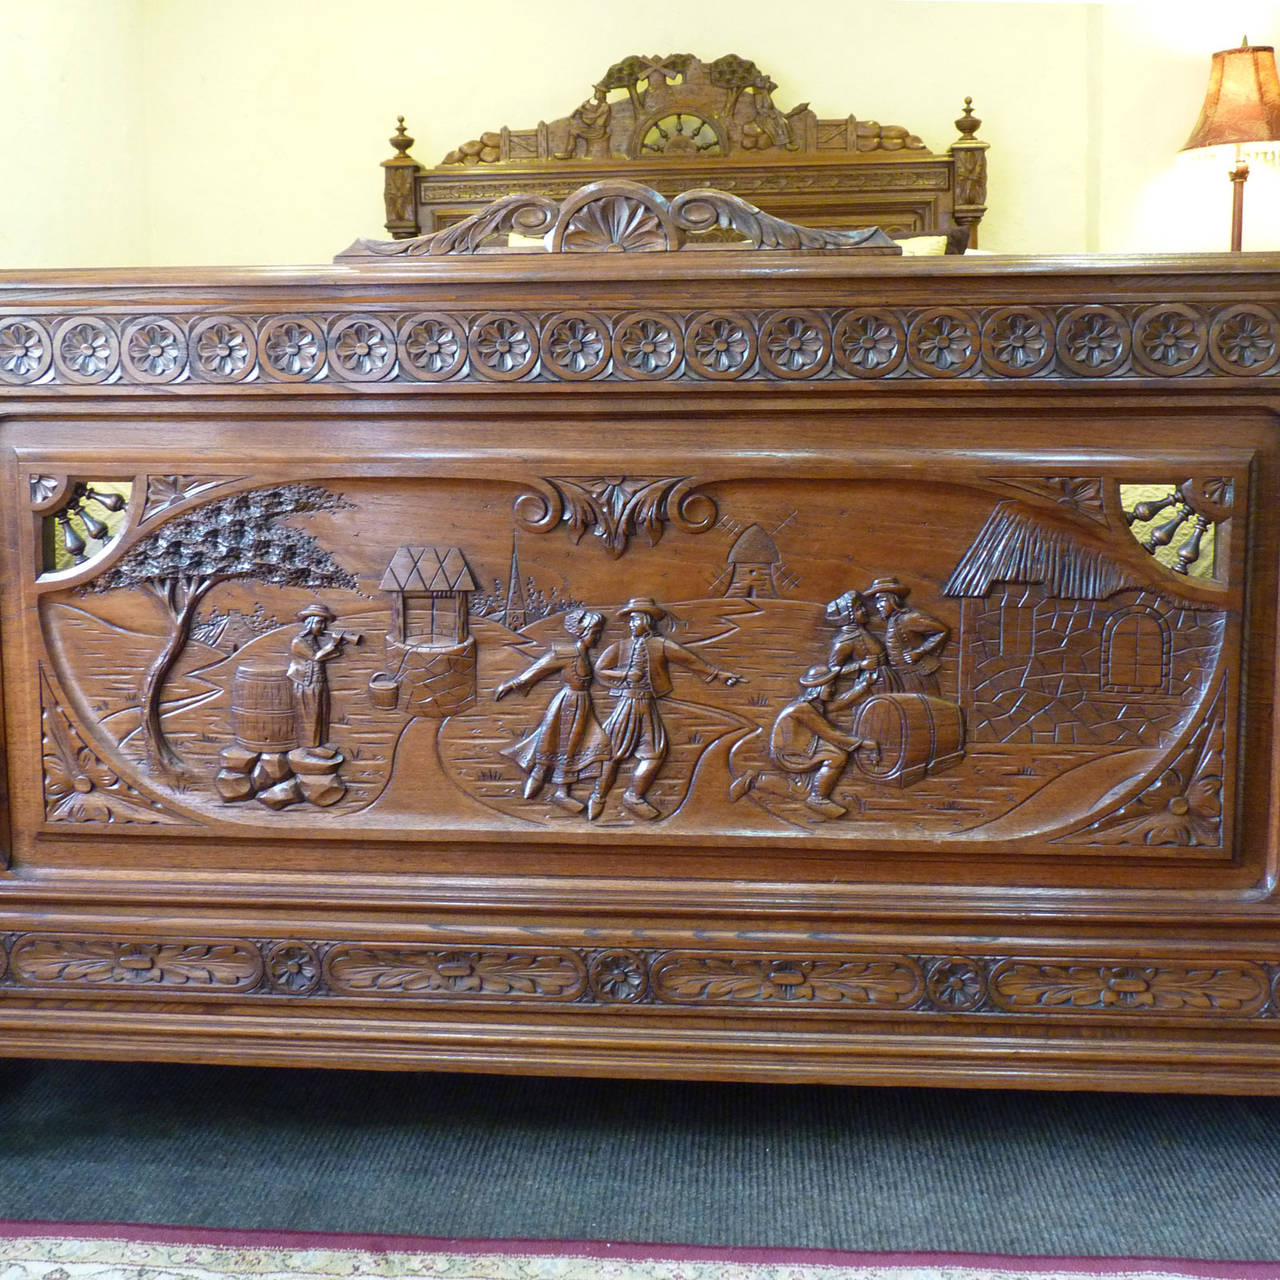 A superb Breton bed from the Brittany region of France in oak, with fine carving. This was probably a marriage piece with husband and wife depicted on the pediment and dancing scenes of merriment on the foot board, possibly showing wedding